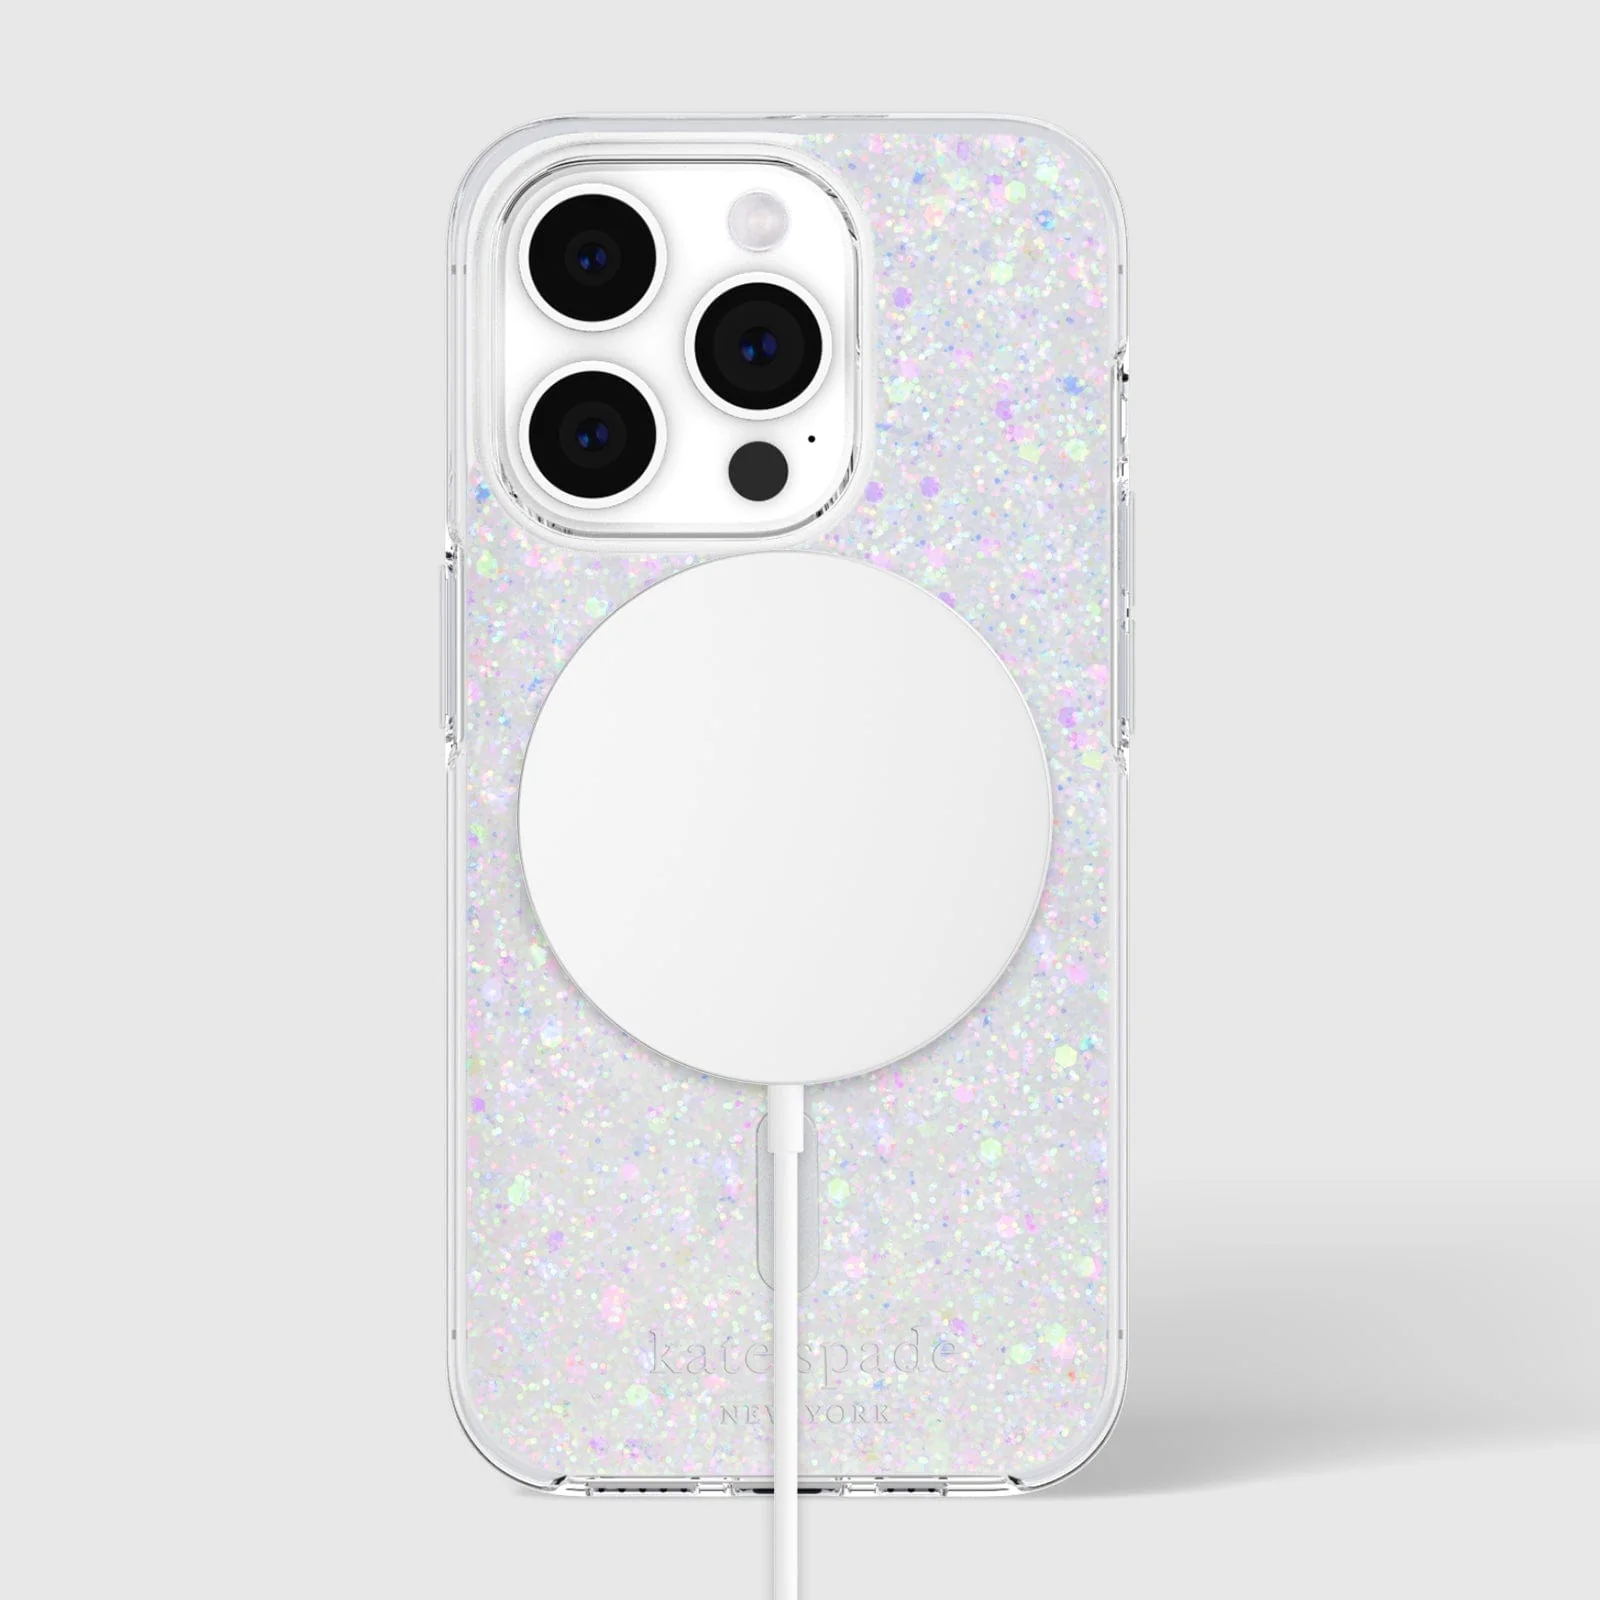 Kate Spade รุ่น Protective Case with MagSafe - เคส iPhone 15 Pro - สี Chunky Glitter Iridescent